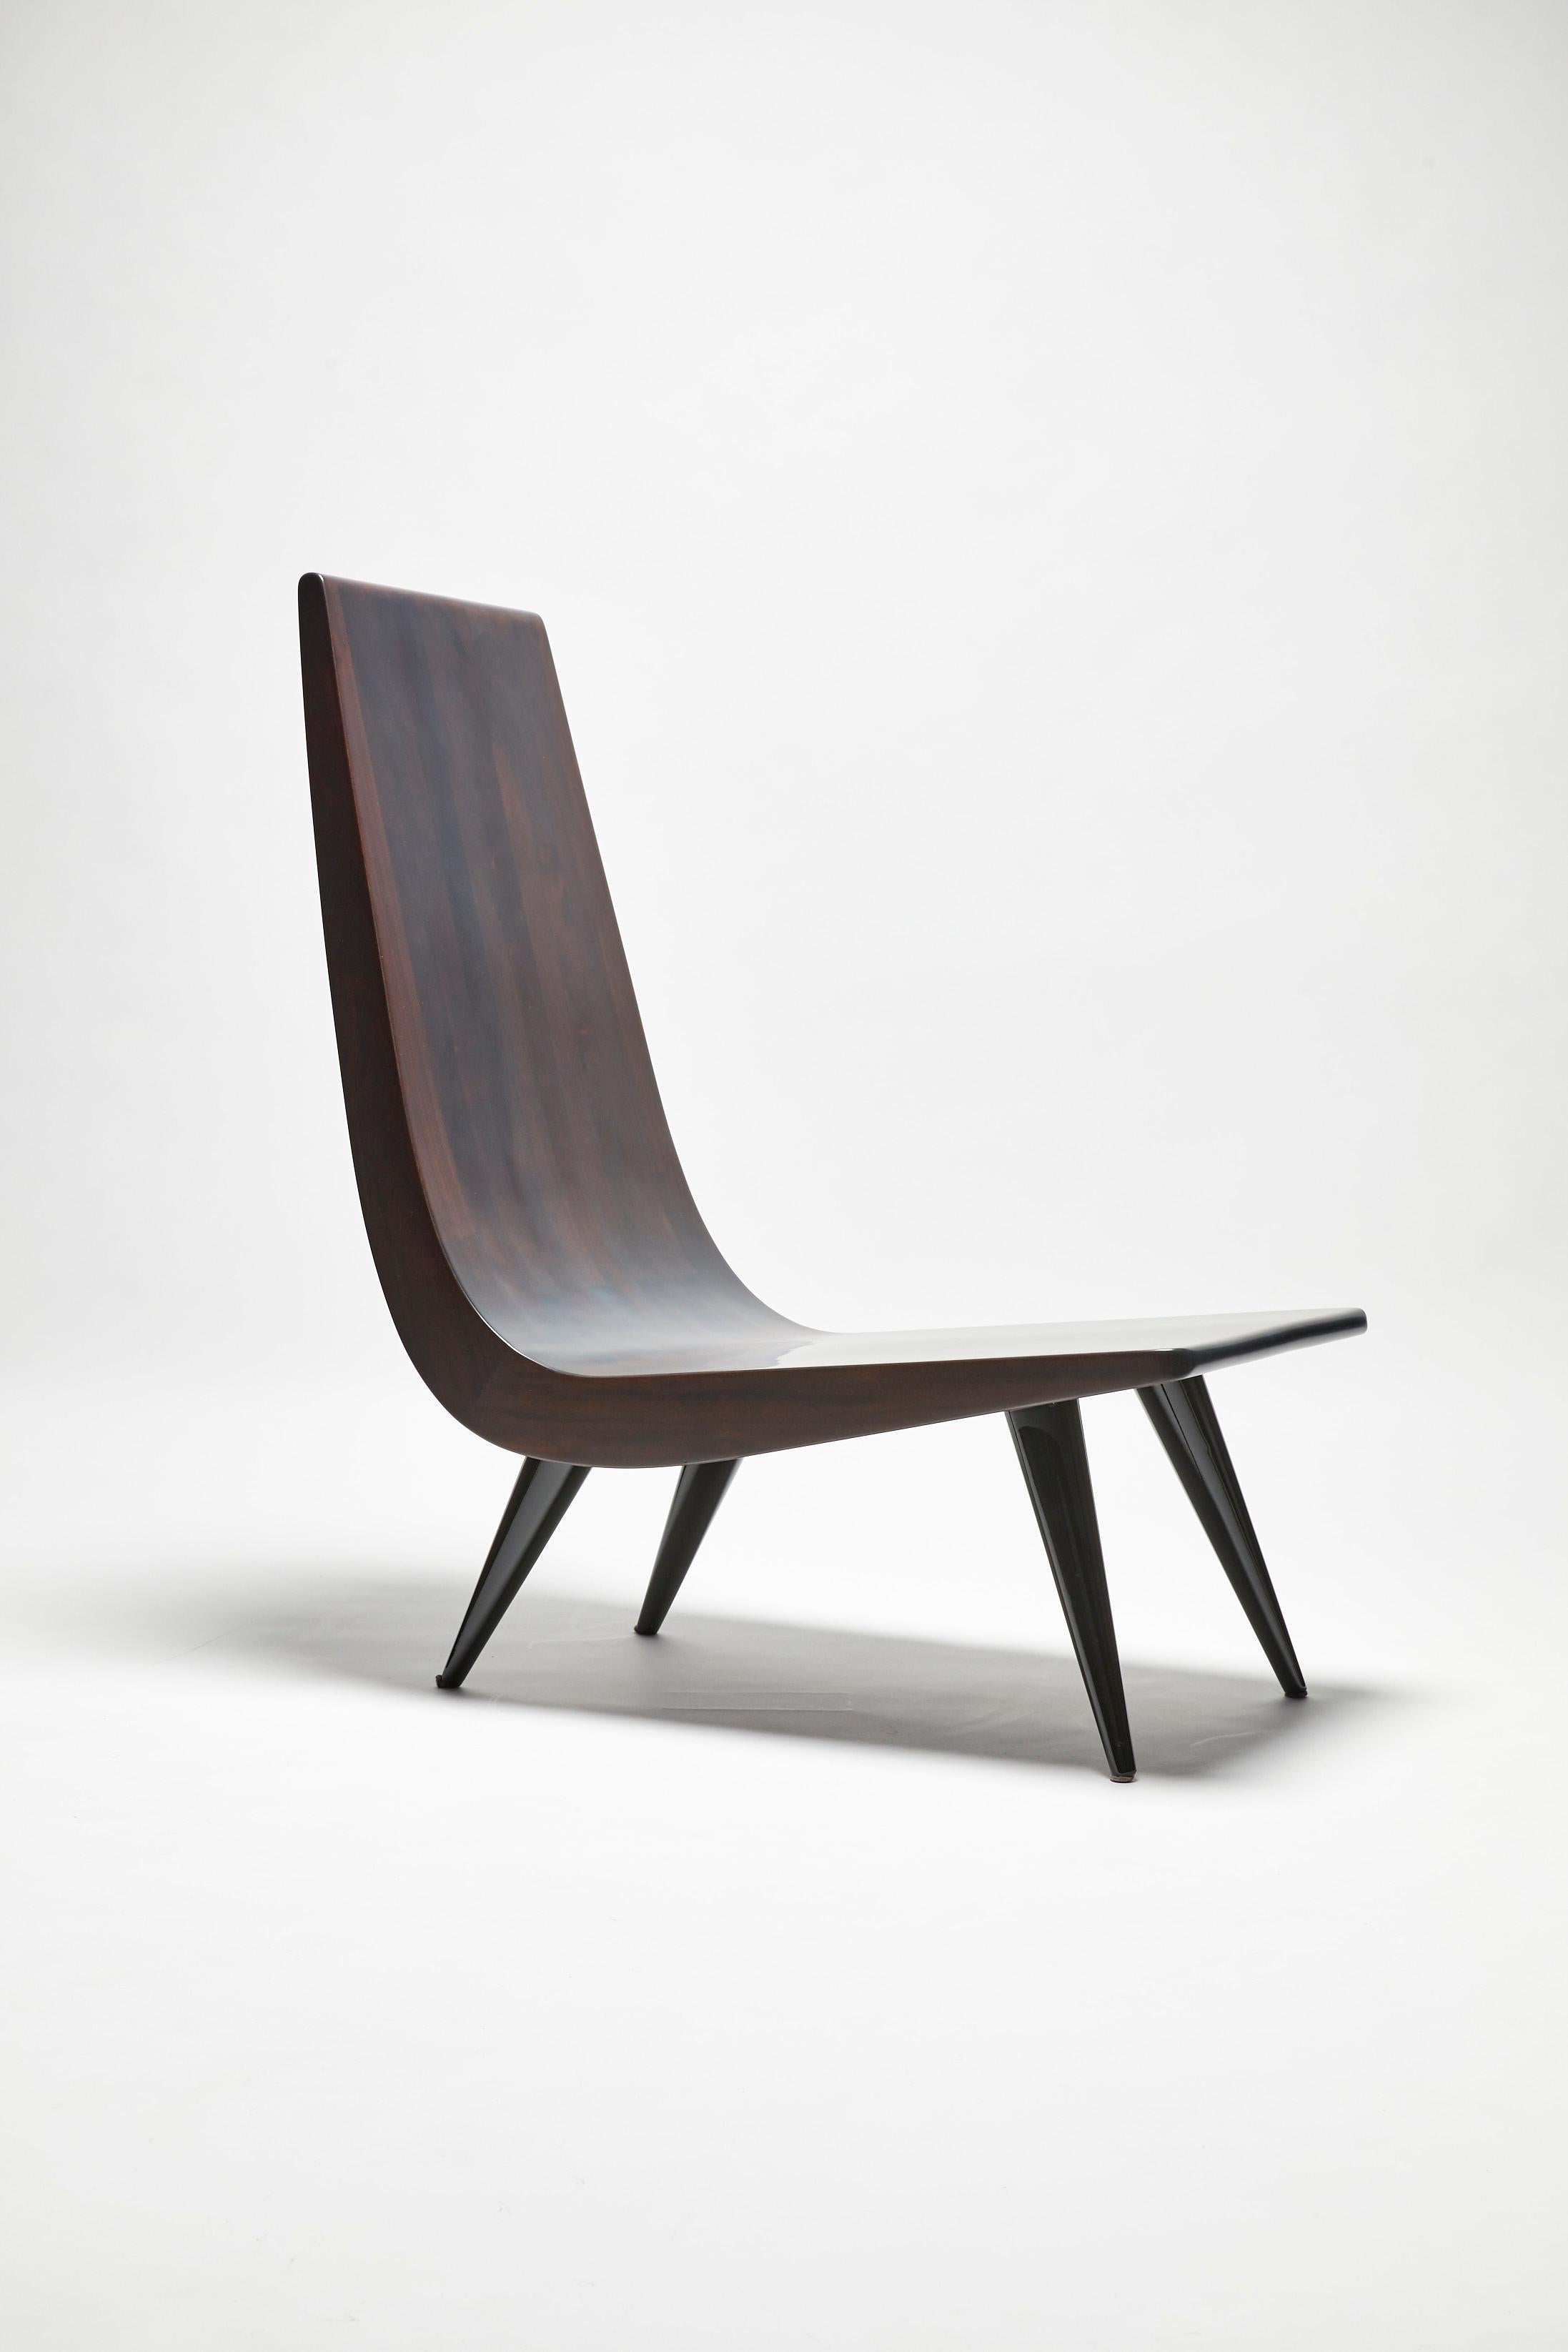 Oiled Lounge chair, JAH, by Reda Amalou, 2019, Walnut and Steel legs 